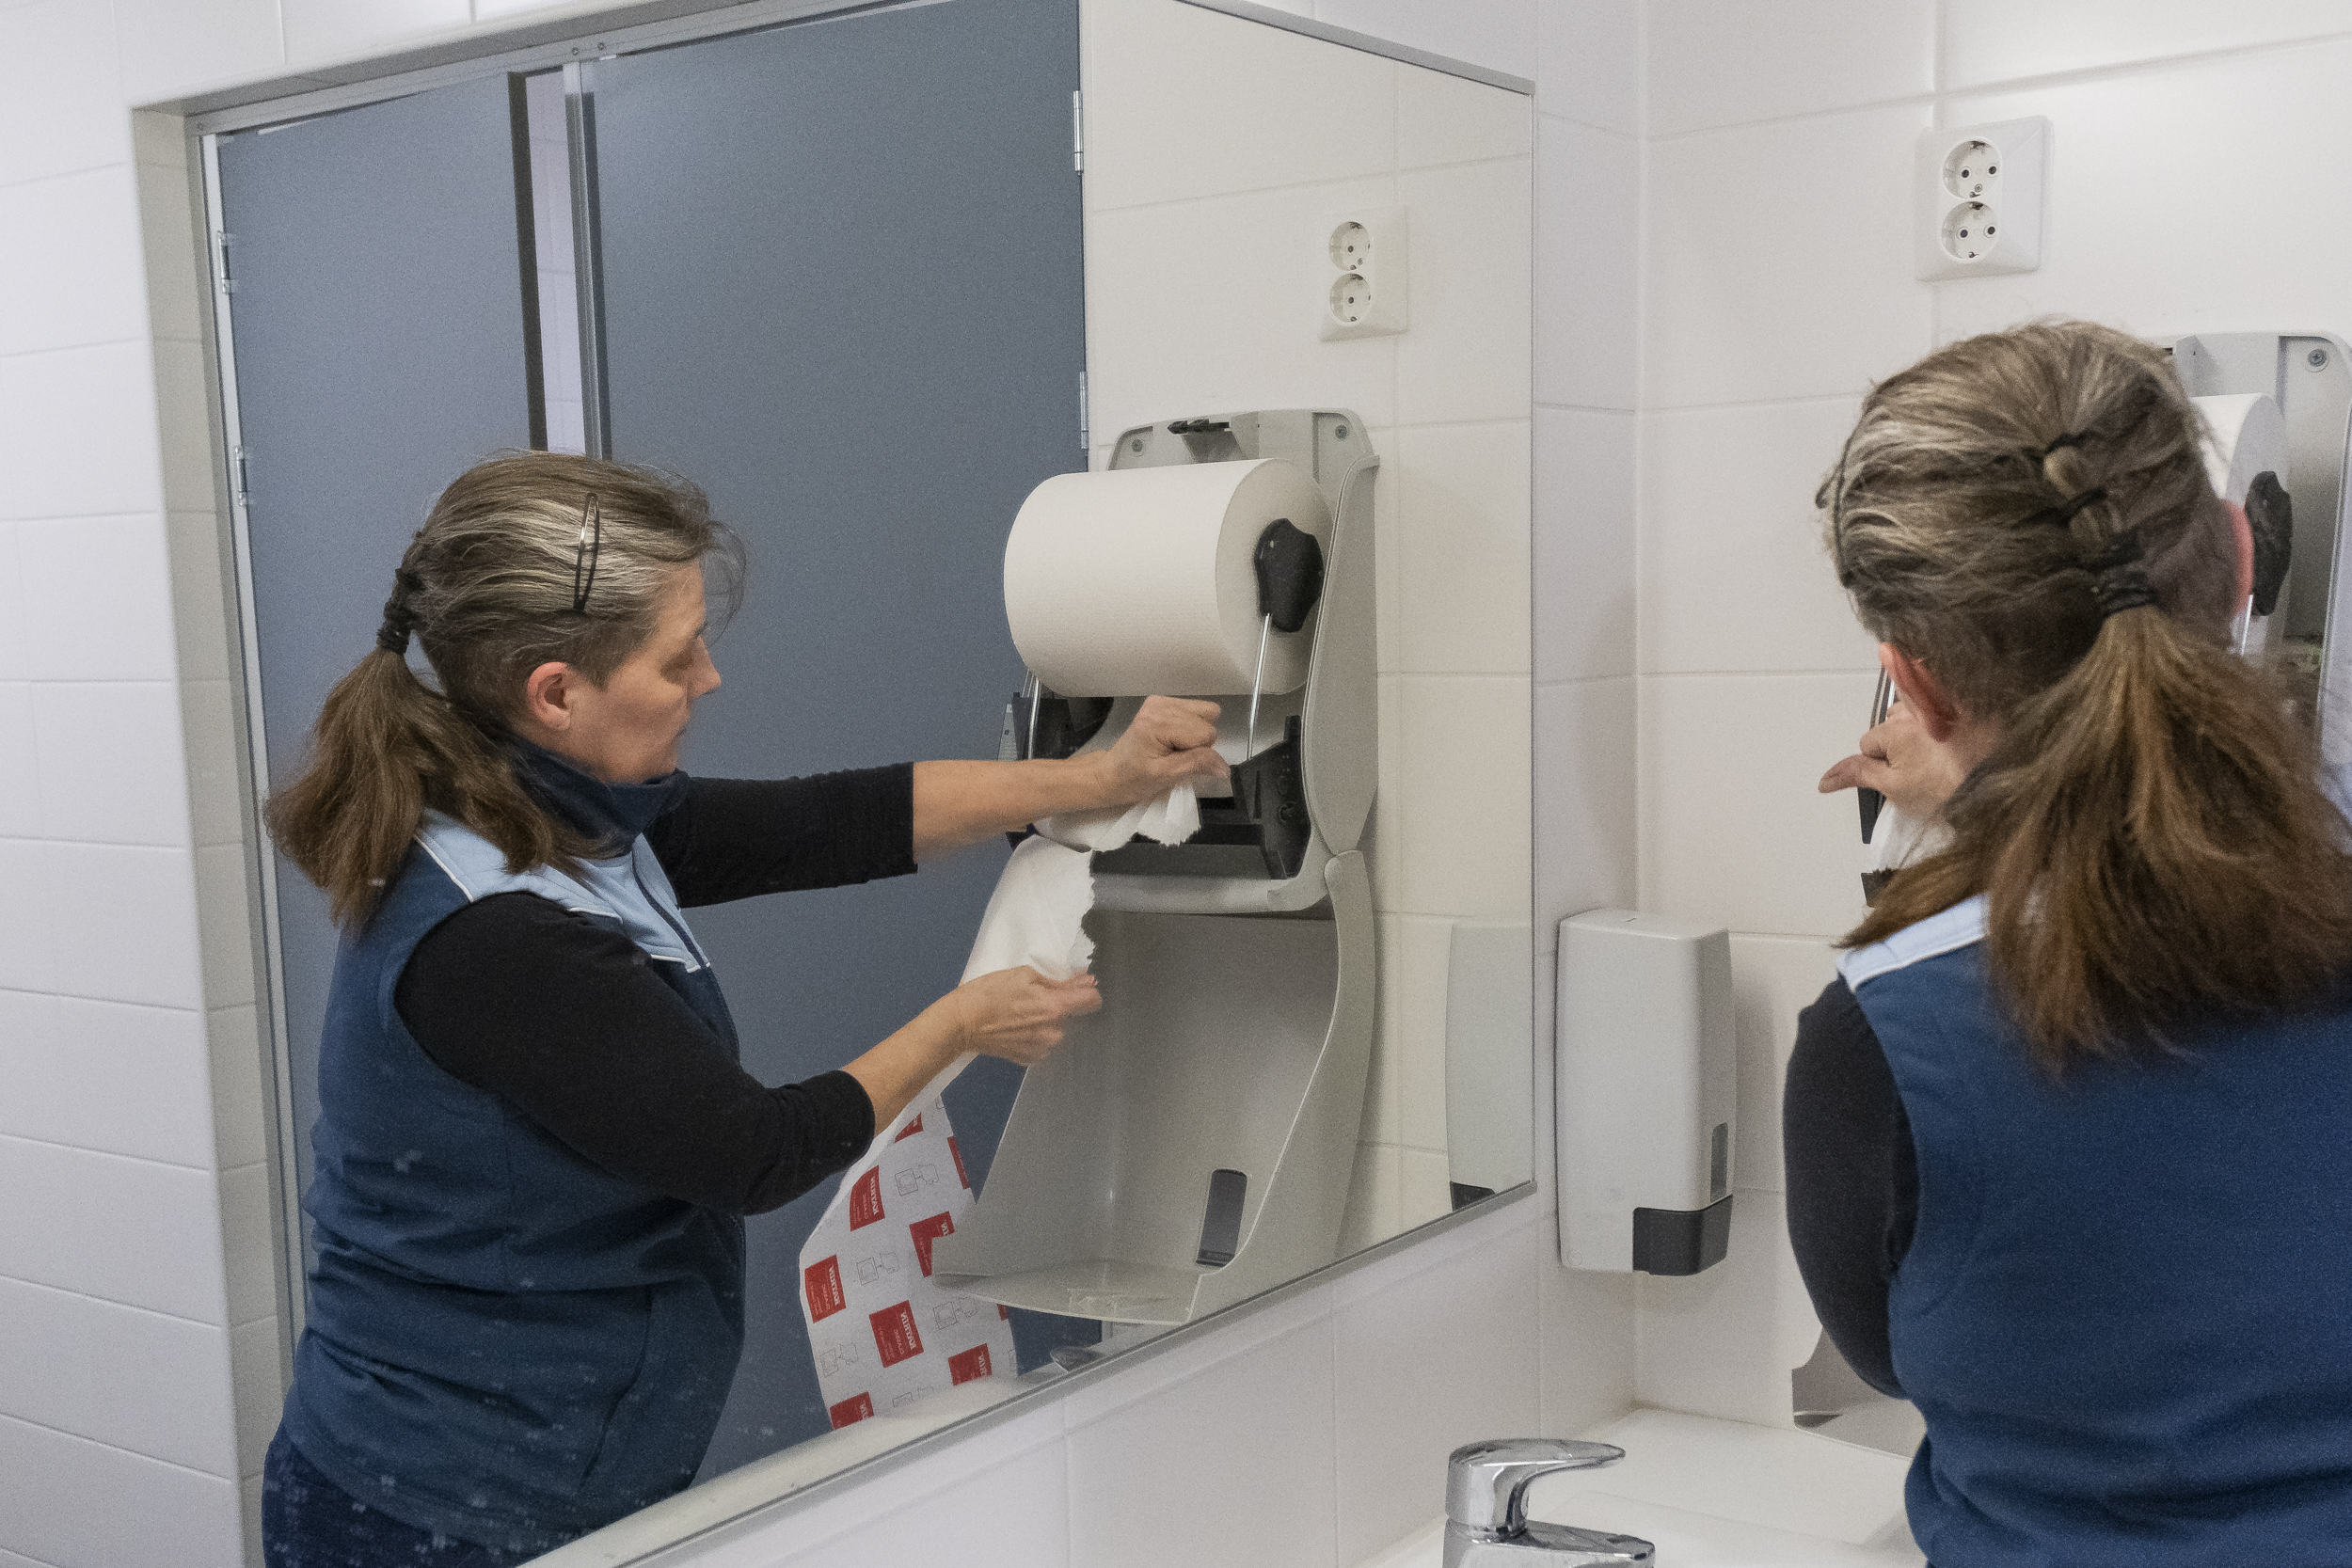 Shot for Oulun Ylioppilaslehti in January 2020. Pictured is a a clening lady in the campus bathroom of University of Oulu.